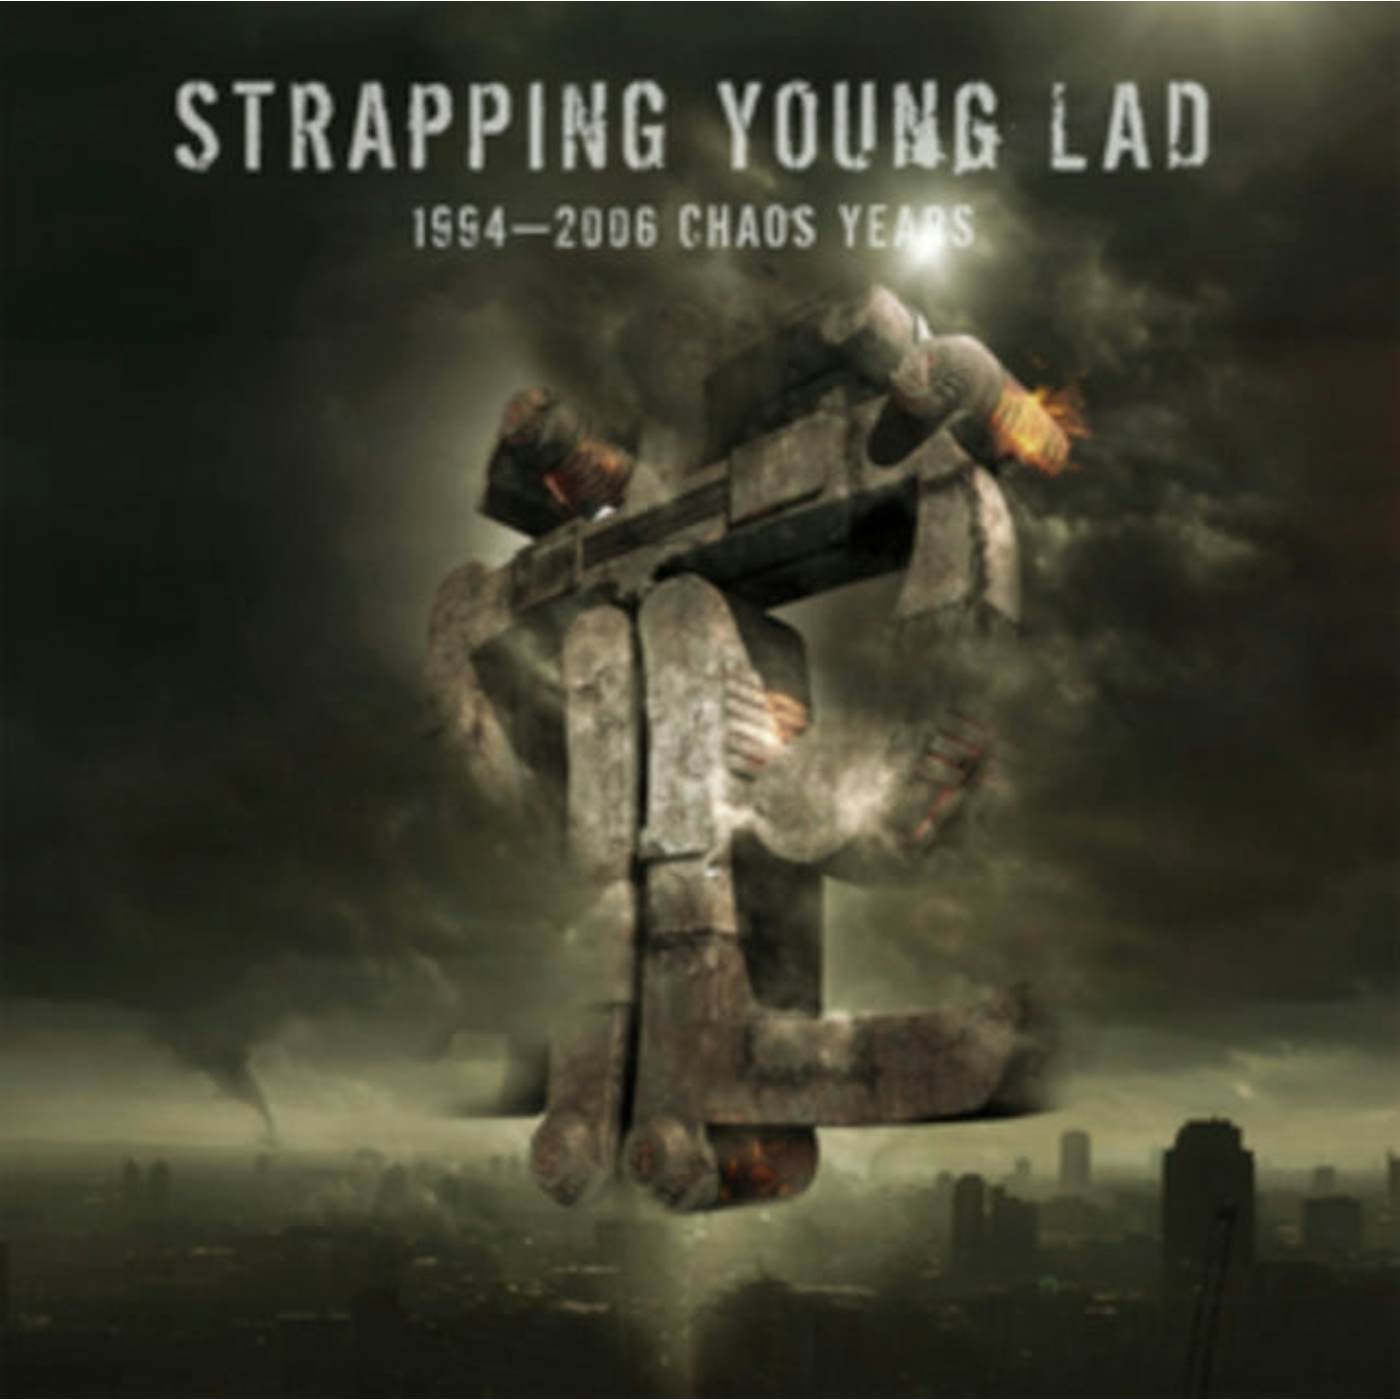 Strapping Young Lad LP - 1994-2006 Chaos Years (Vinyl)